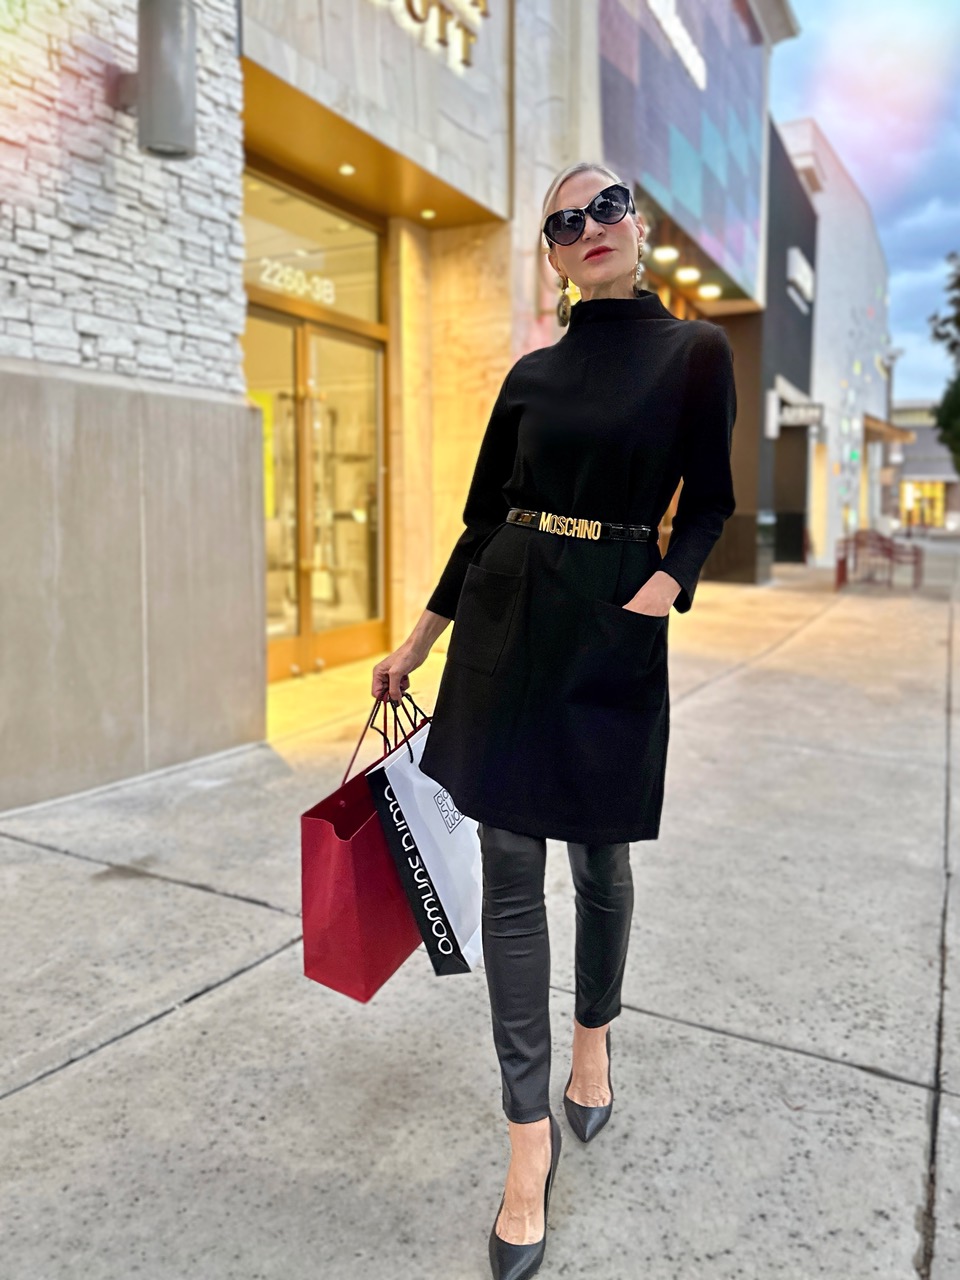 Lifestyle Influencer, Jamie Lewinger of More Than Turquoise wearing Ponte knit dress from Clara Sunwoo  in black